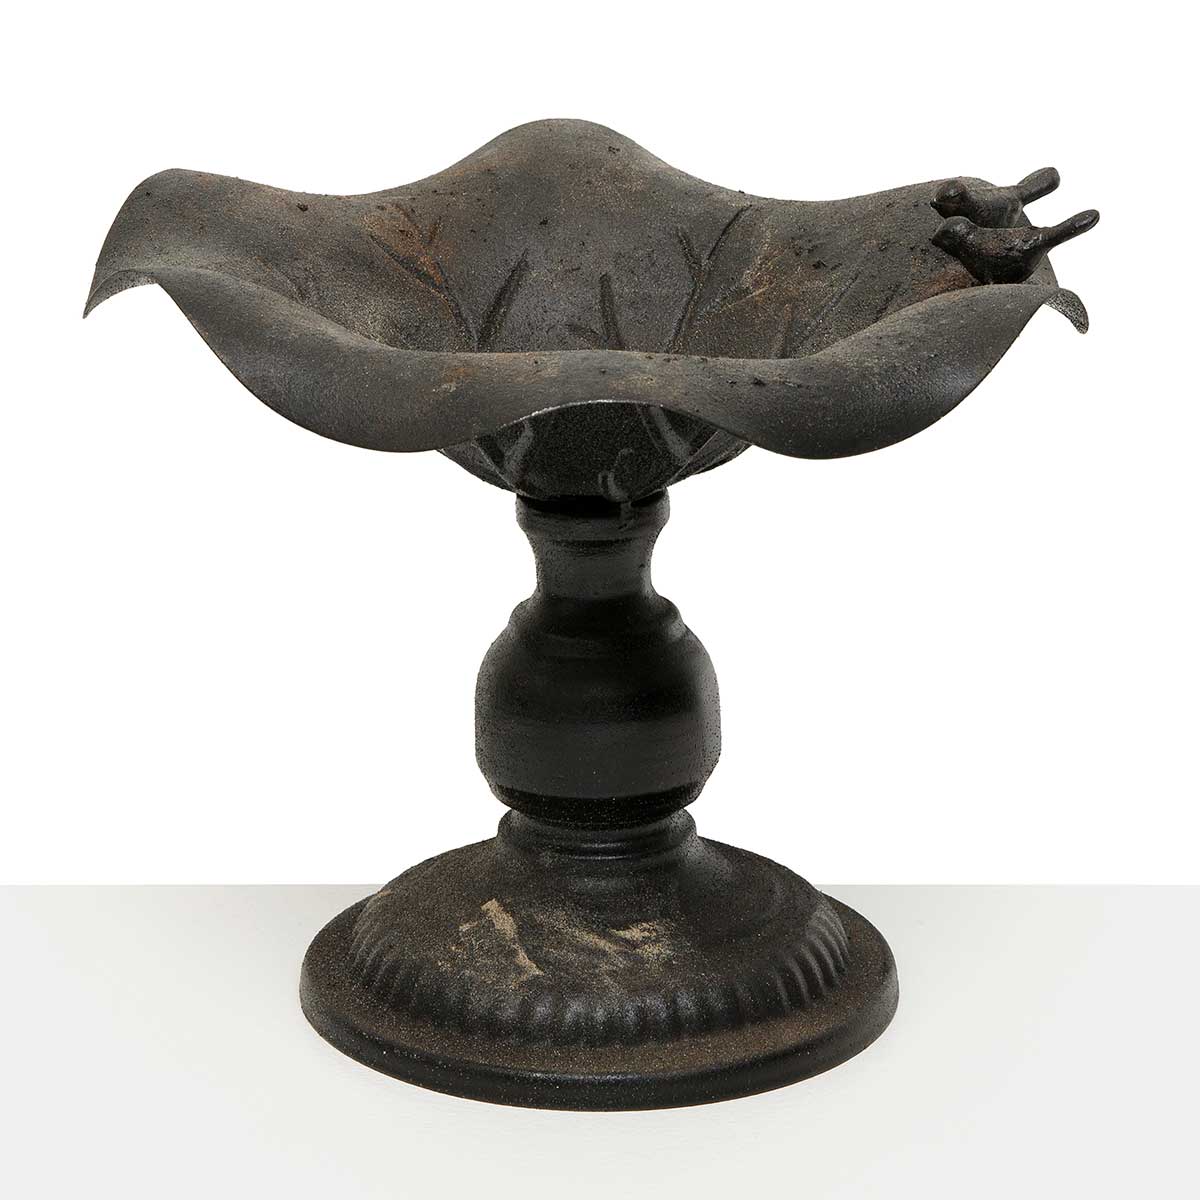 BIRD BATH PEDESTAL WITH BIRDS LARGE 12IN X 11.5IN X 9.5IN - Click Image to Close